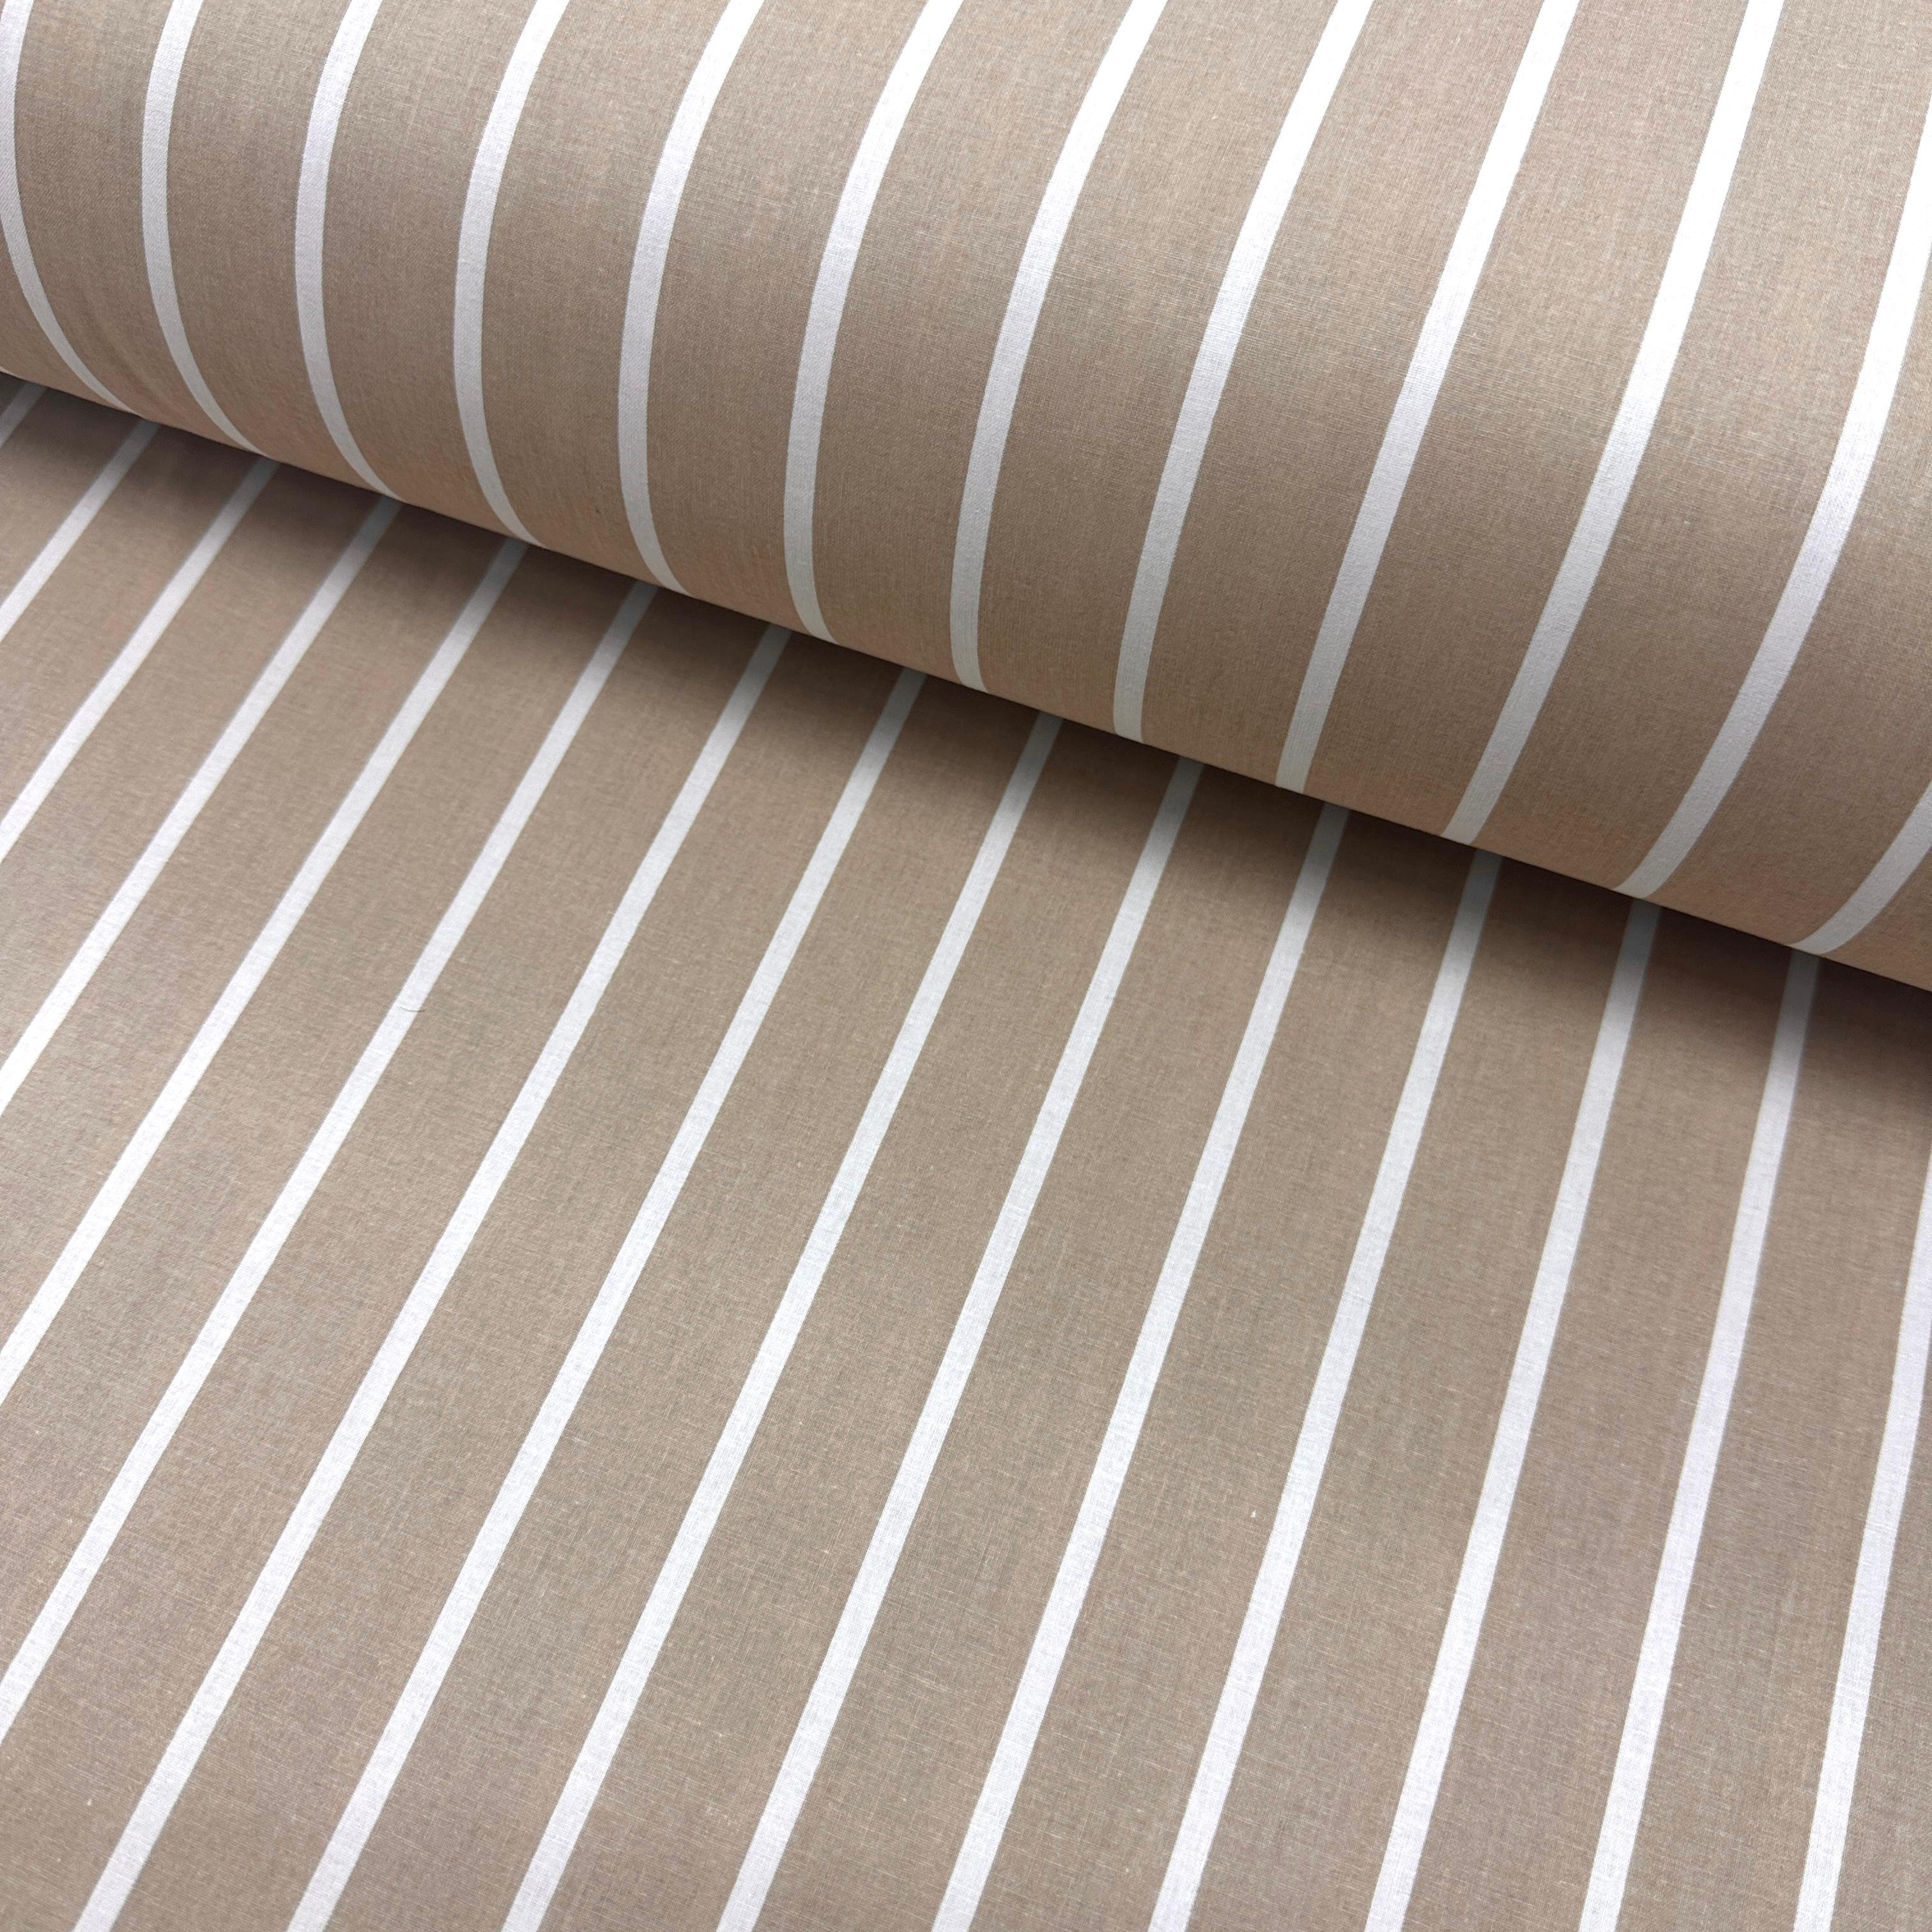 White Lines On Colored Poplin Fabric